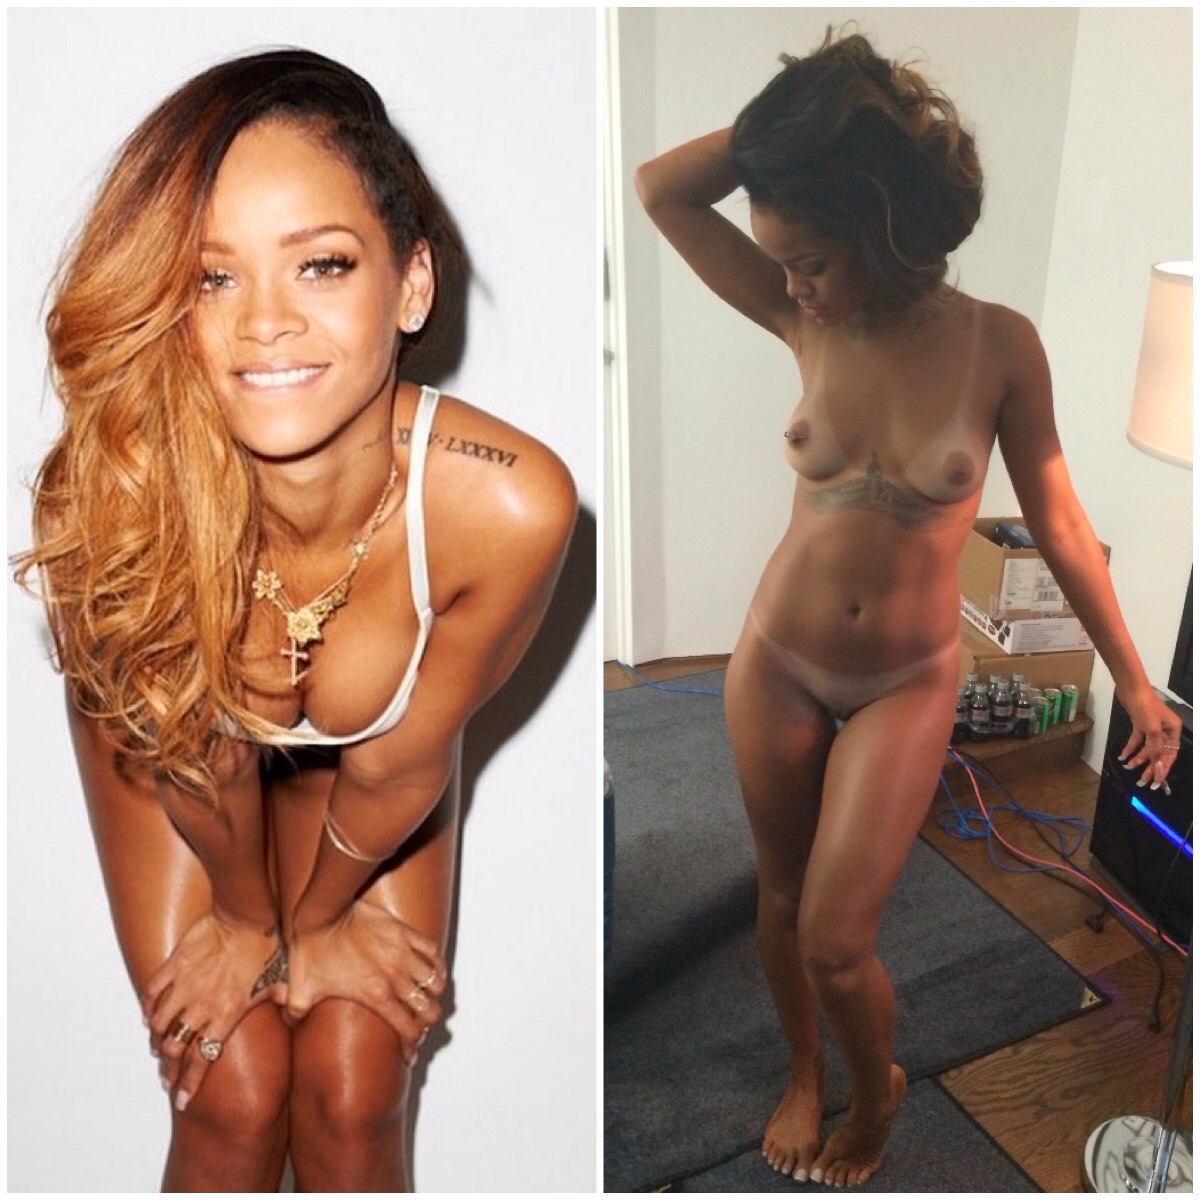 Rihanna did not have to slay for vogue nude underwear photoshoot, but she did